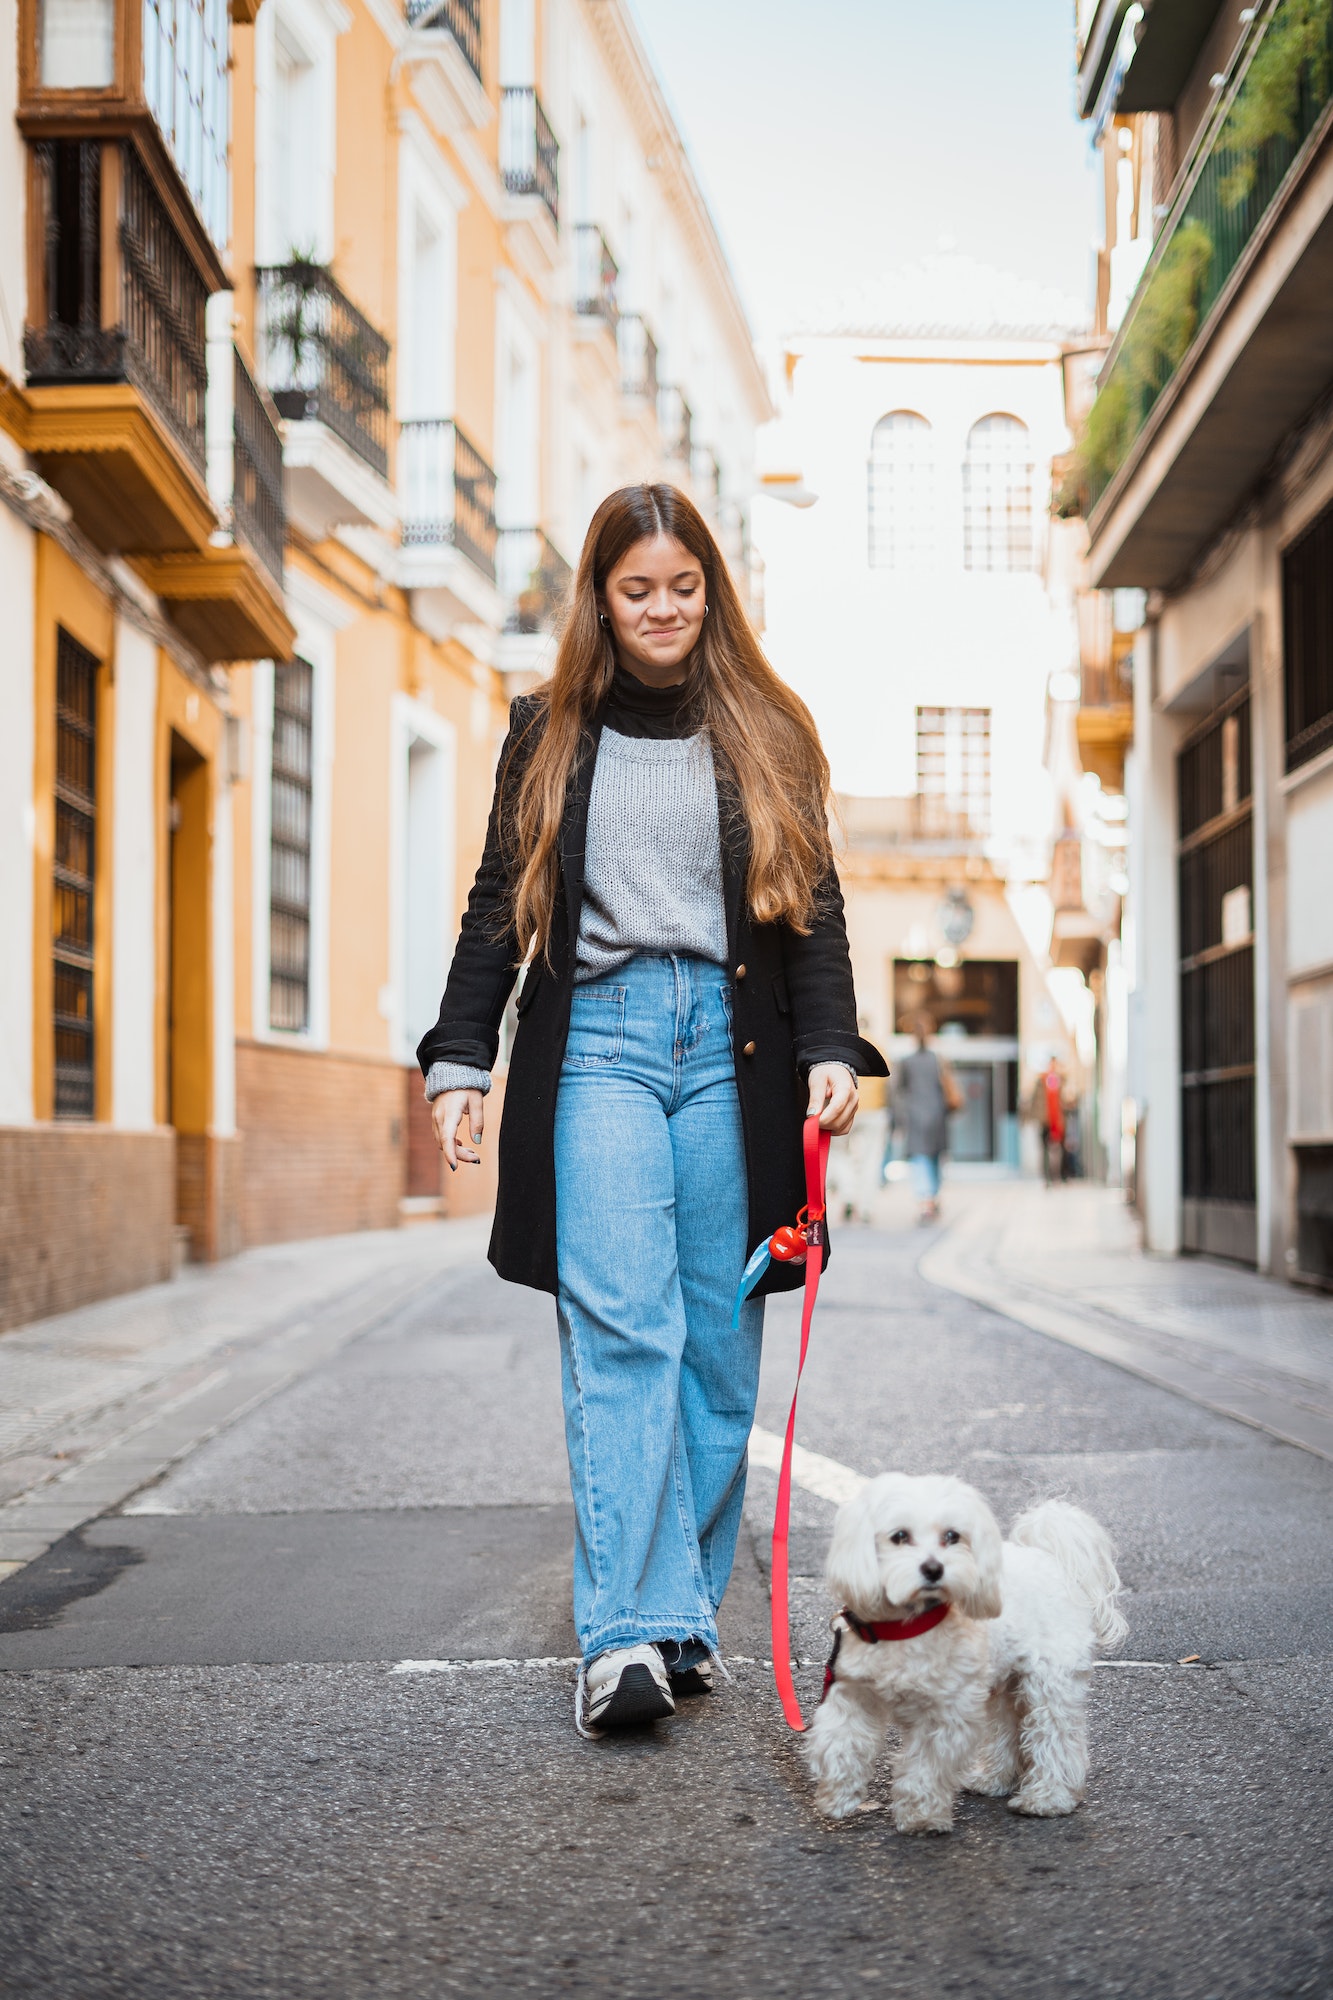 Girl walking with her dog in the city